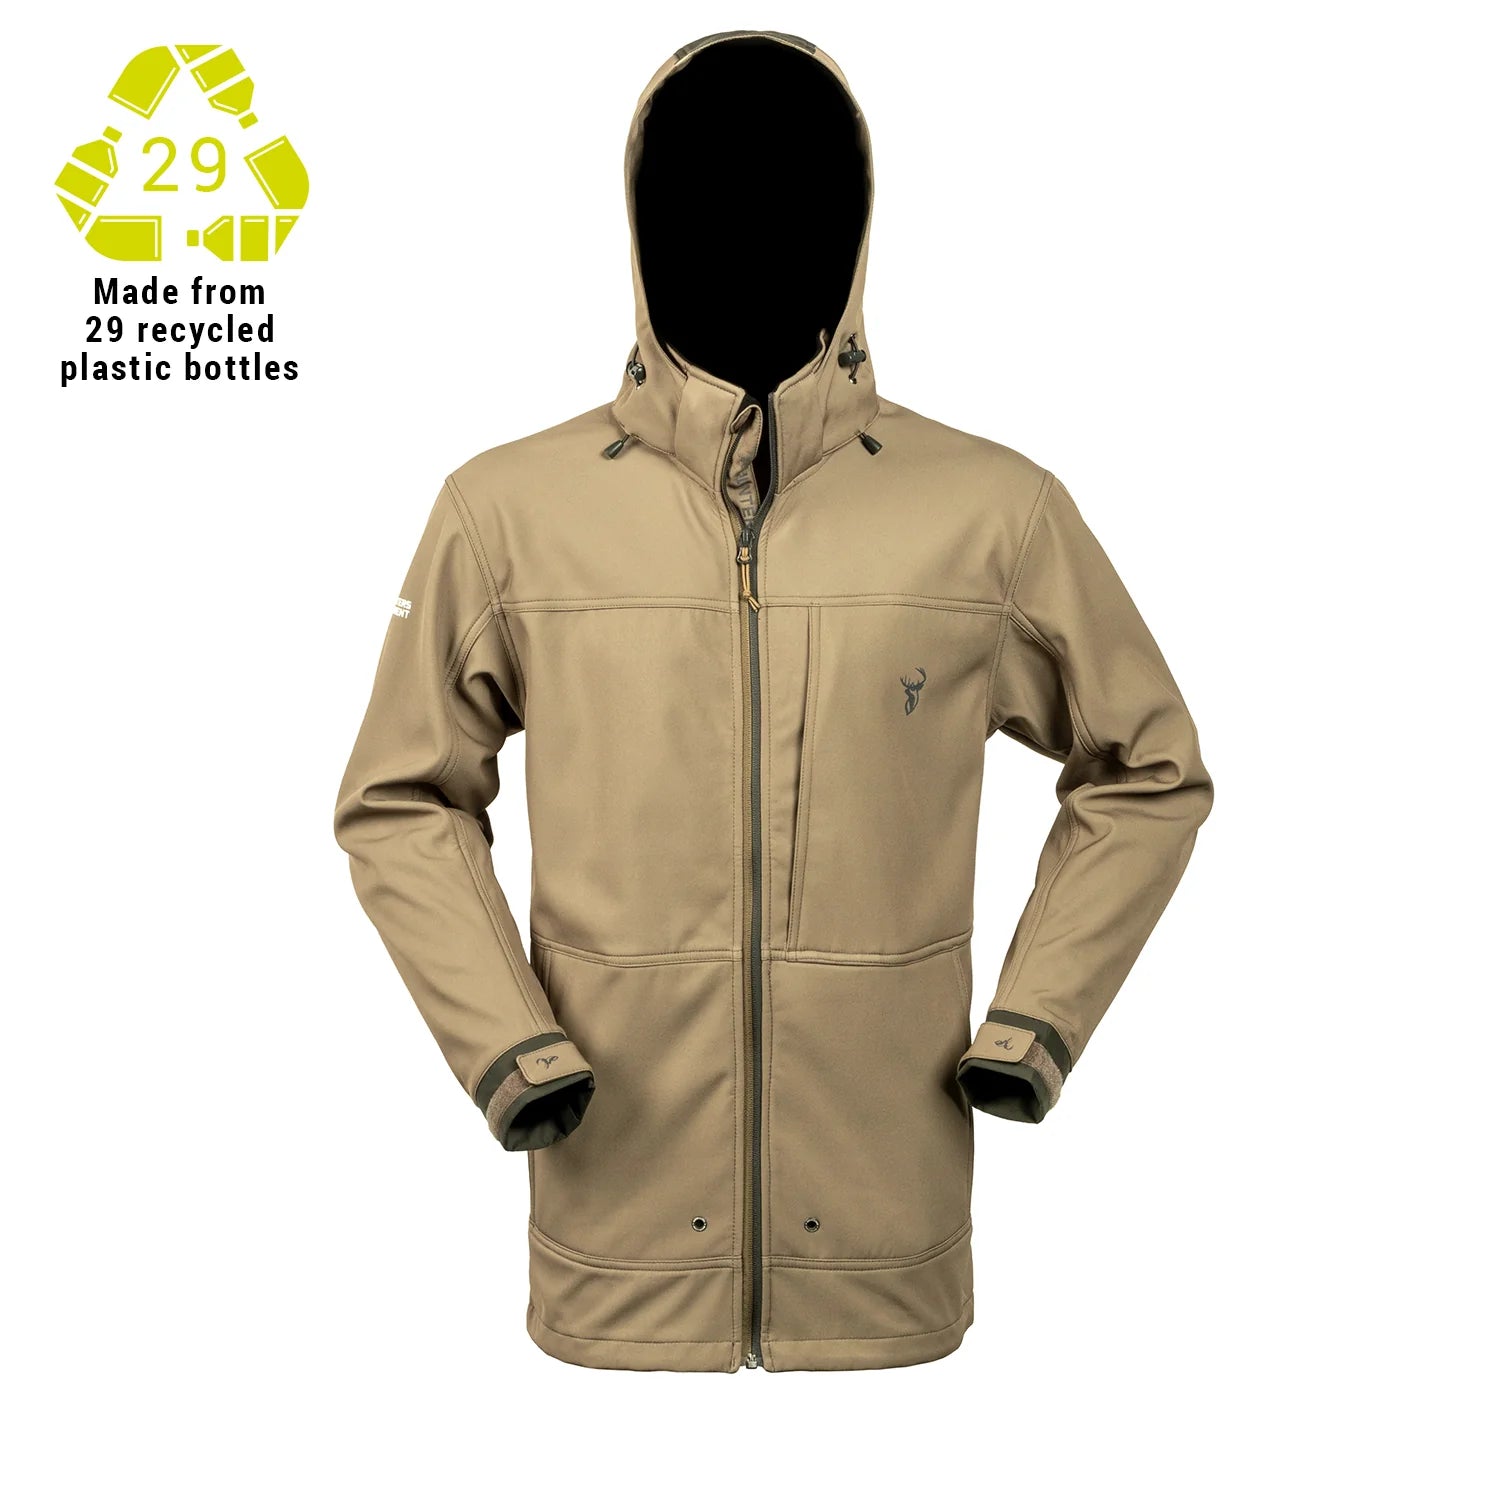 Hunters Element Legacy Jacket - Tussock - XS / TUSSOCK - Mansfield Hunting & Fishing - Products to prepare for Corona Virus